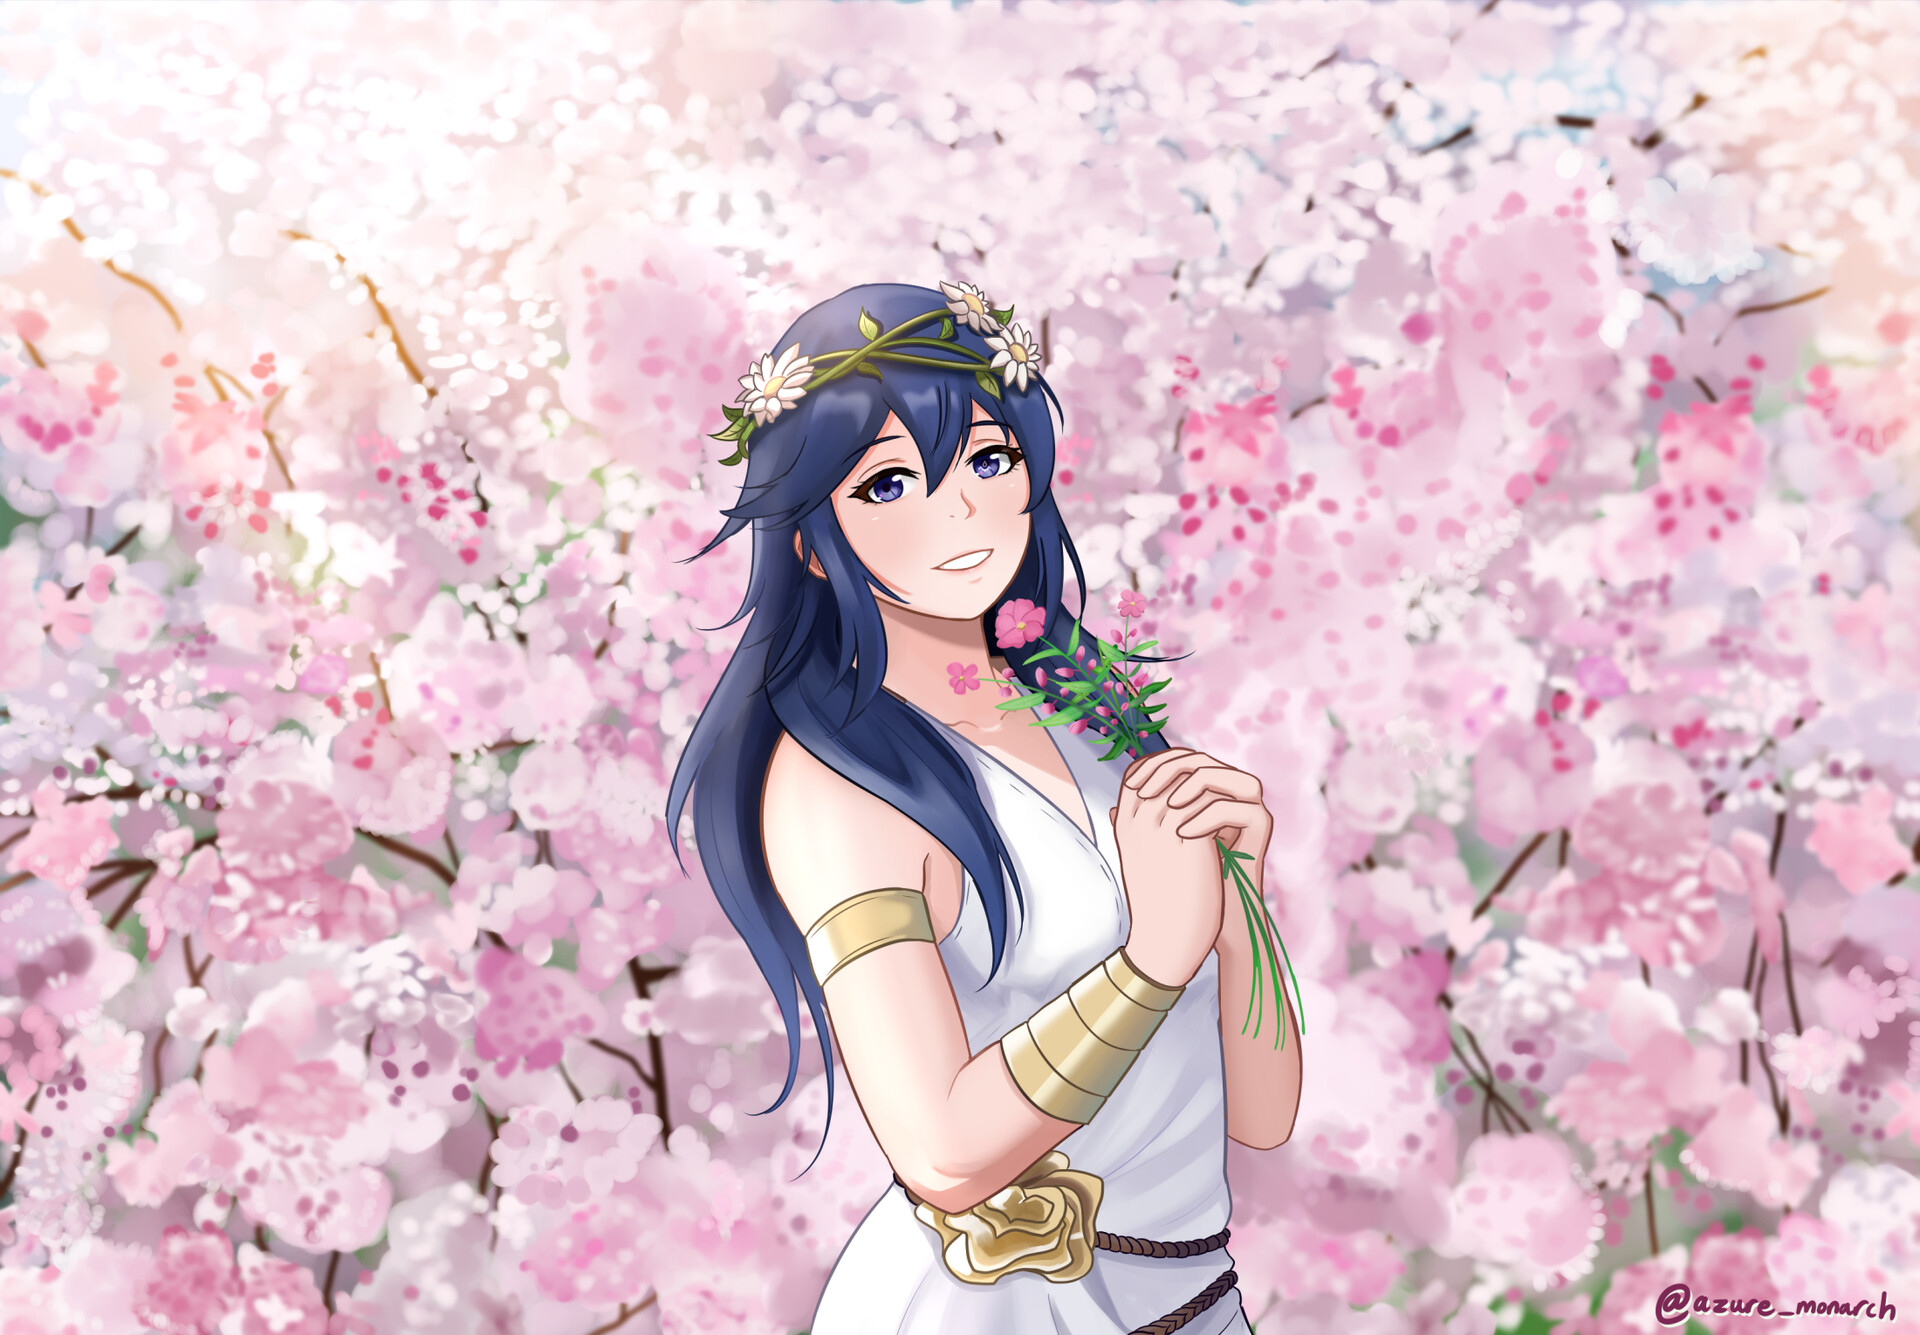 https://cdnb.artstation.com/p/assets/images/images/061/369/589/large/bryan-clunie-lucina-bday-2022-final-small.jpg?1680628894